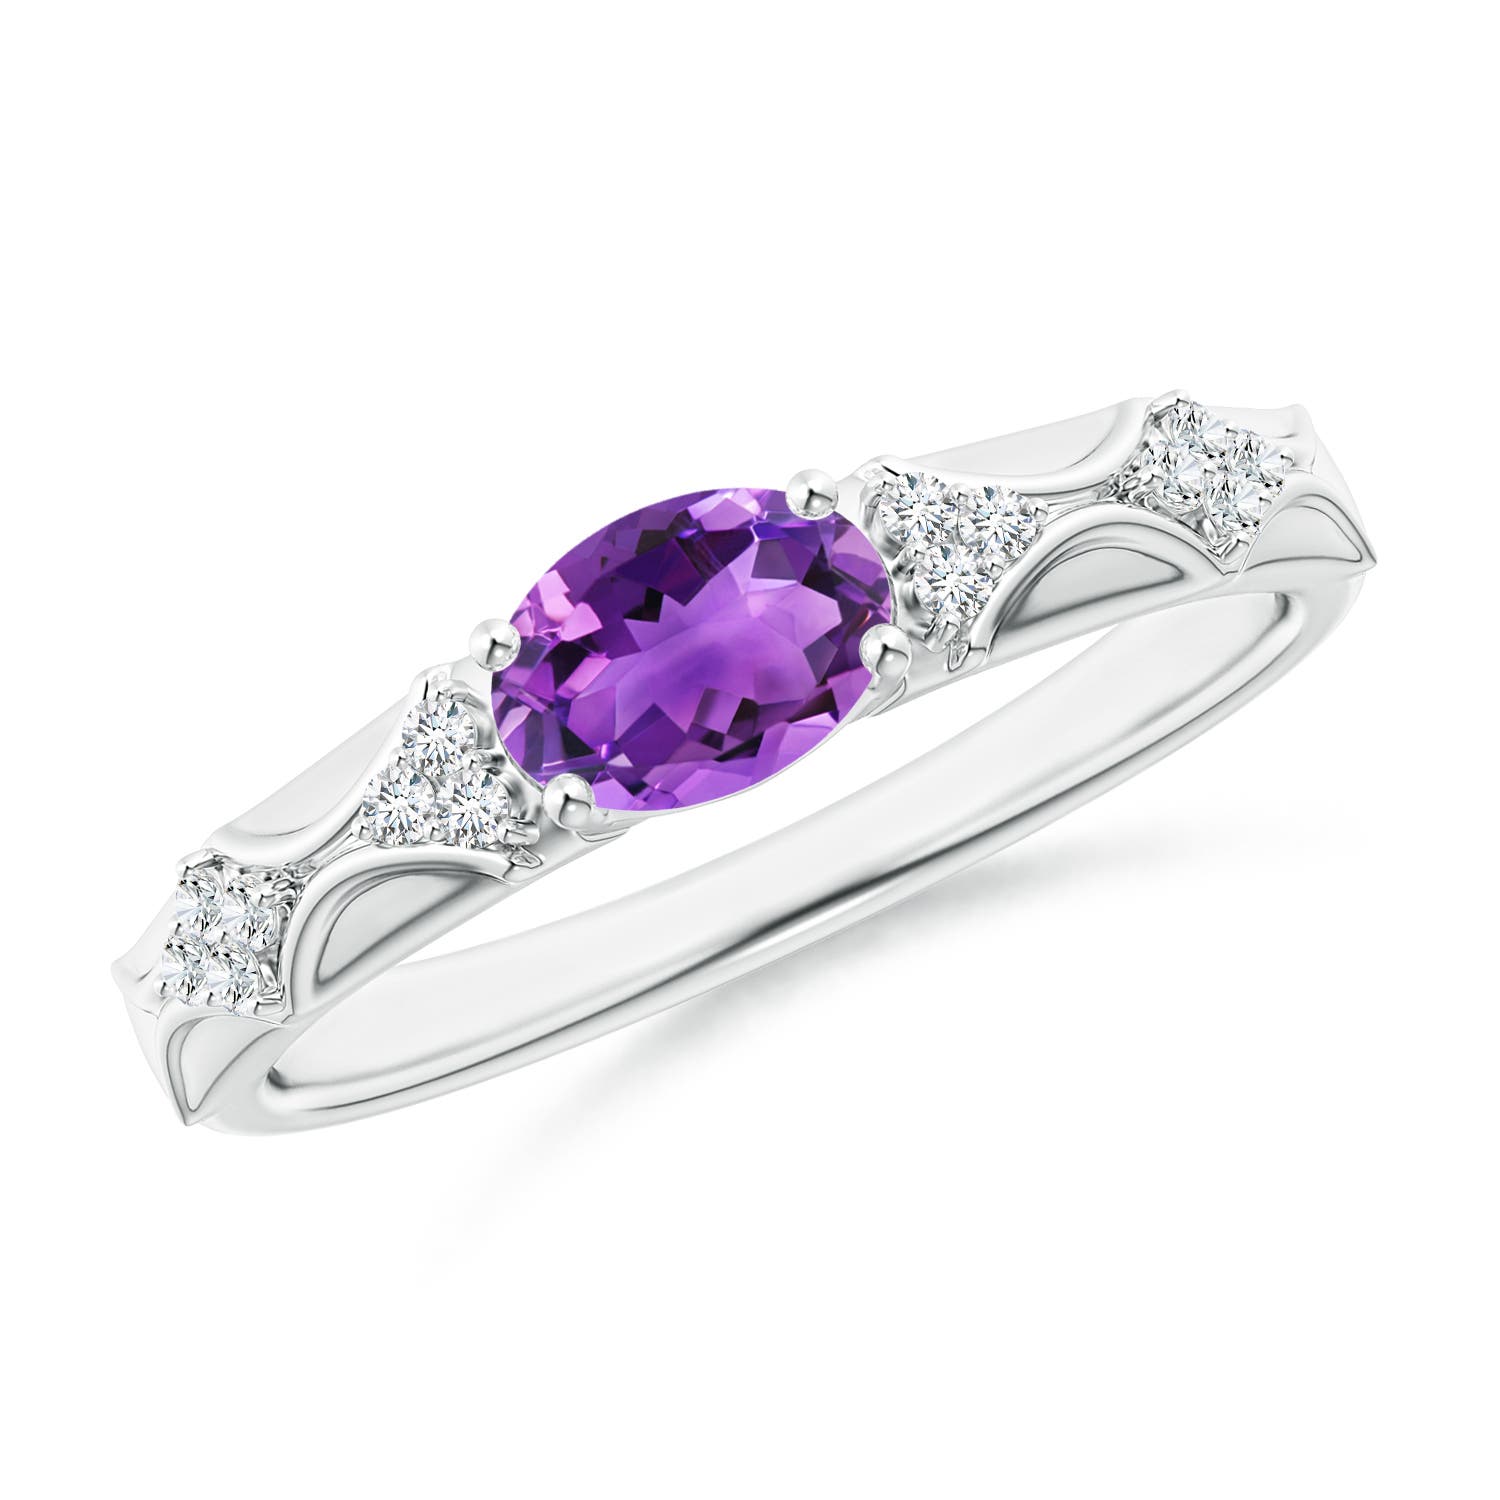 AAA - Amethyst / 0.75 CT / 14 KT White Gold